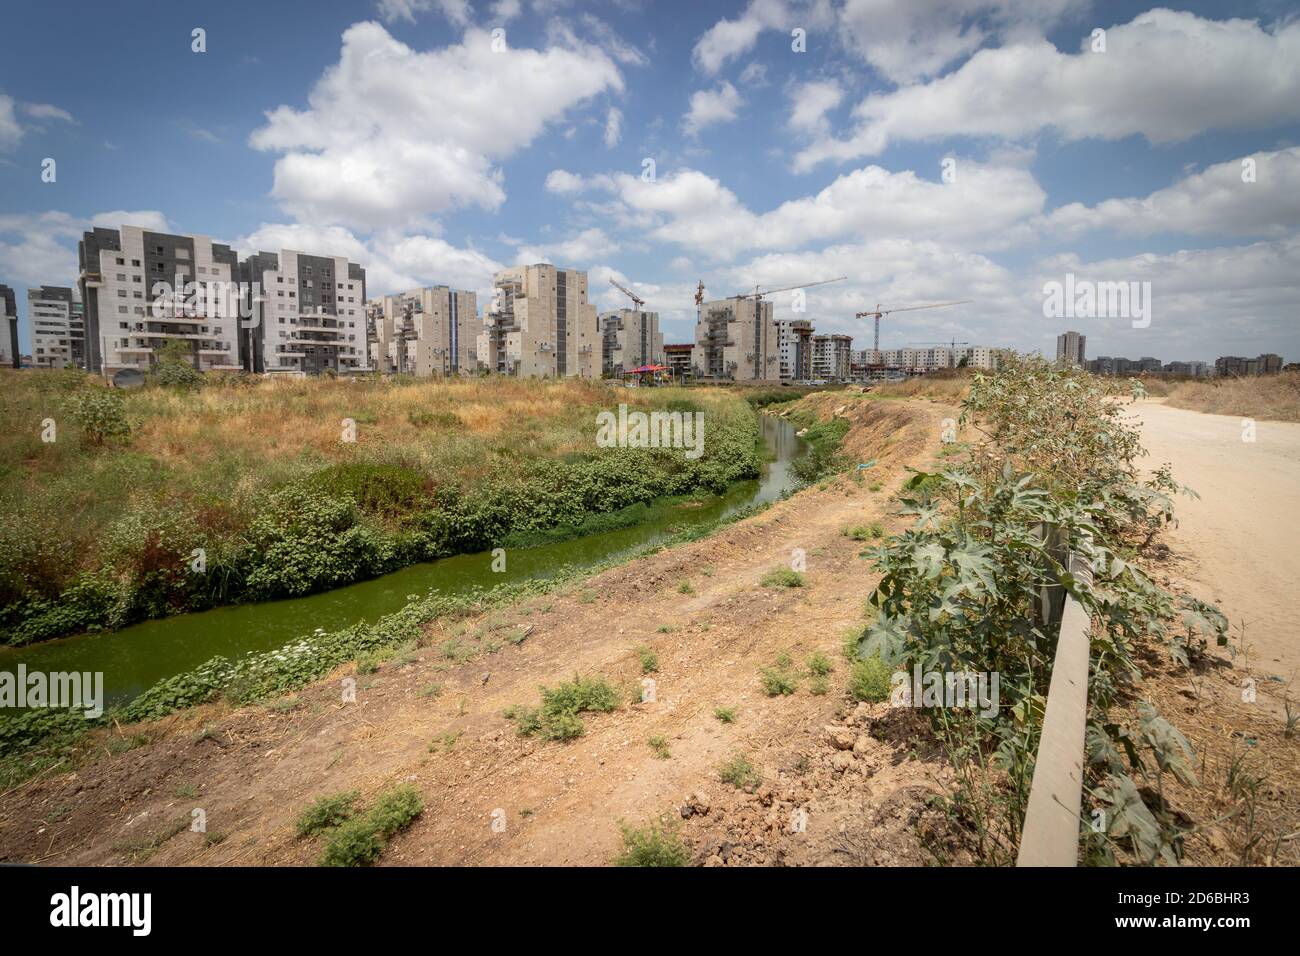 Ganei Ayalon neighborhood at the entrance to Moshav Ahisamakh and a55 stream that flows near the neighborhood, new buildings against a background of c Stock Photo